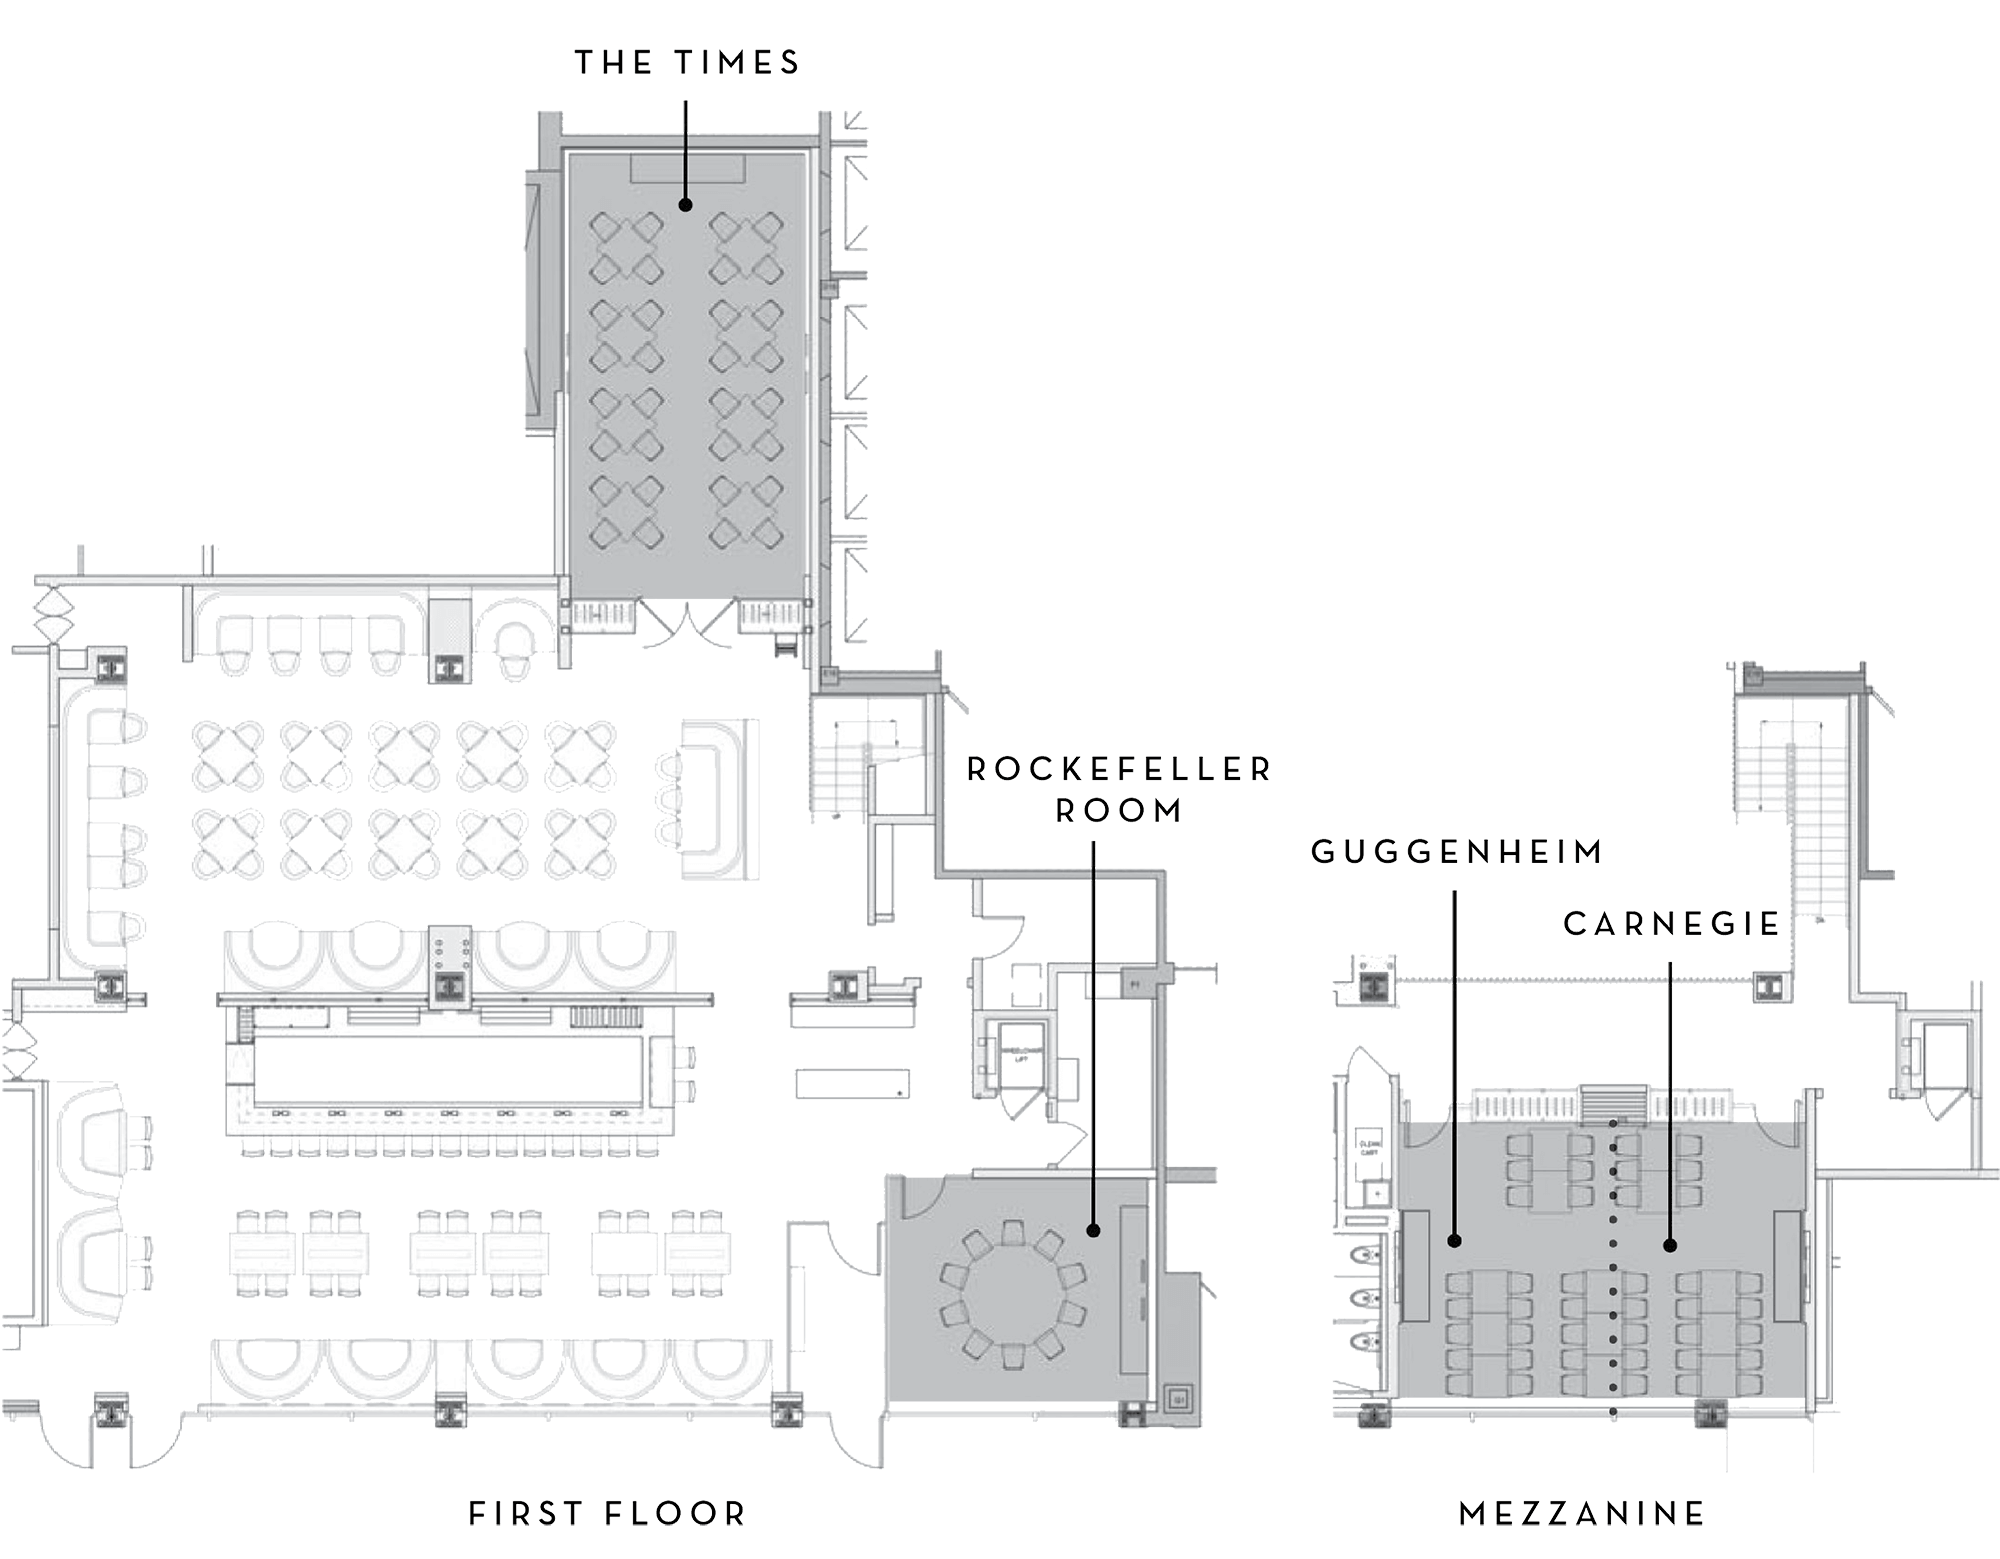 New York City Floorplan for private dining rooms